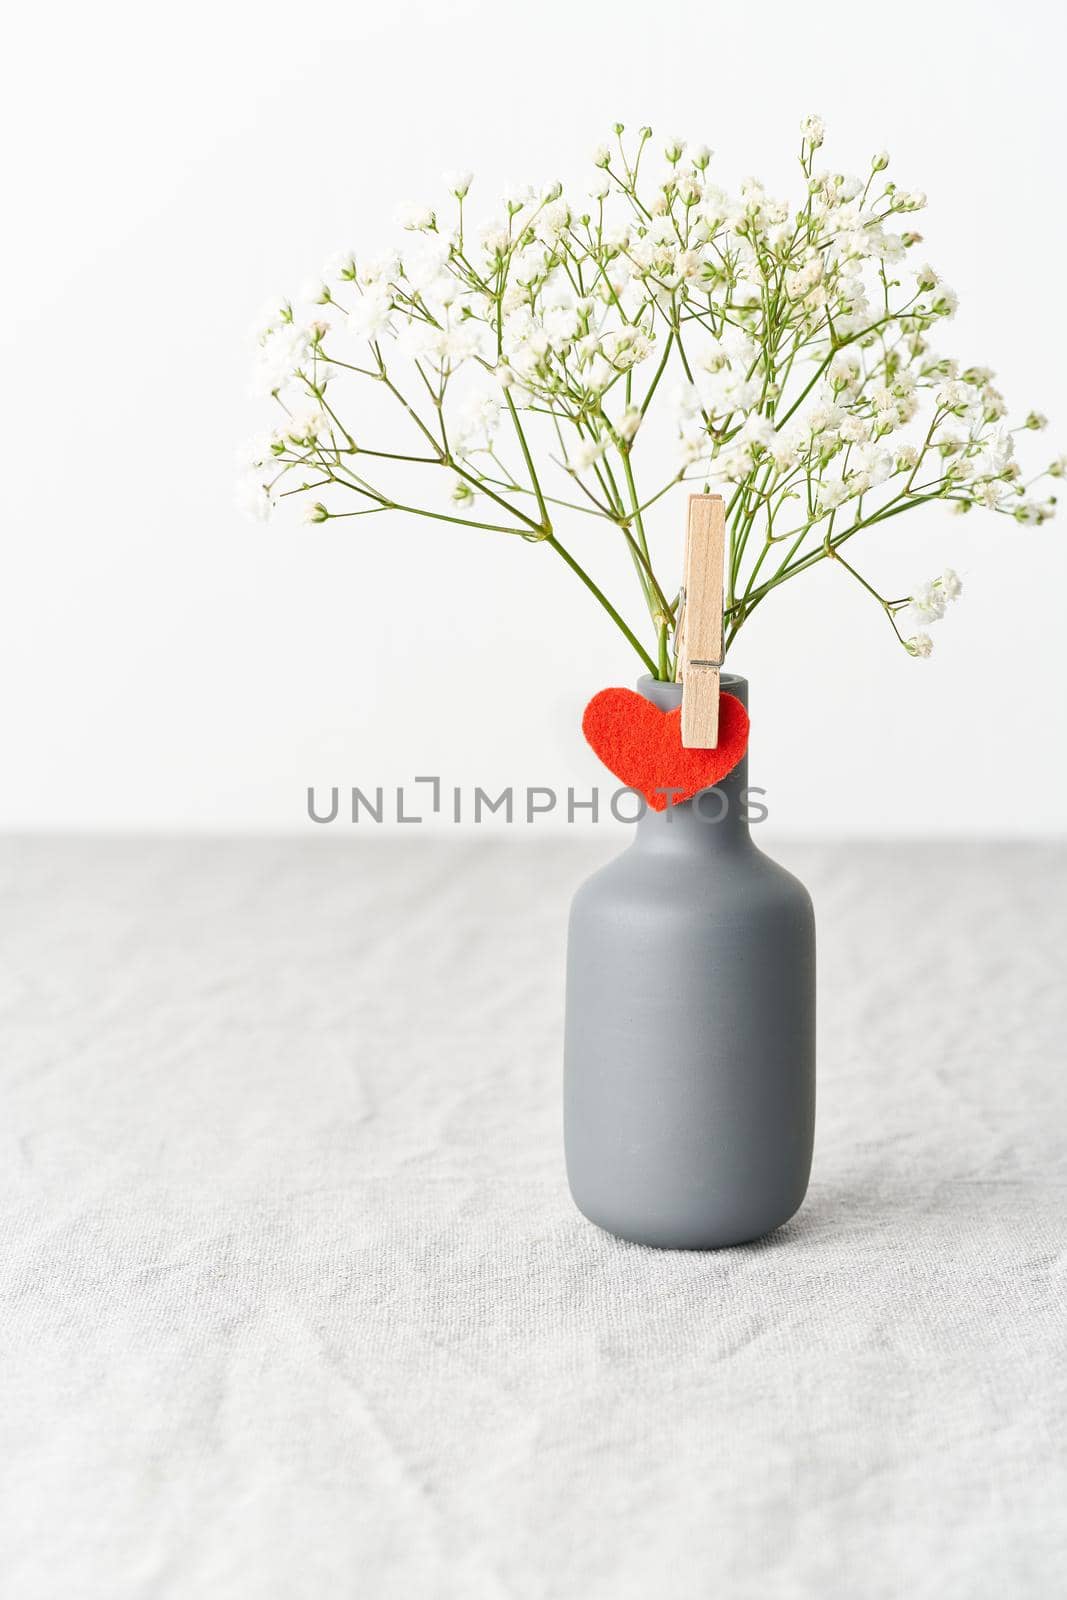 Valentine's Day. Delicate white flowers in a vase. Red felt heart - symbol of lovers. Light white gentle pastel background. Scandinavian minimalism. Side view, copy space, vertical